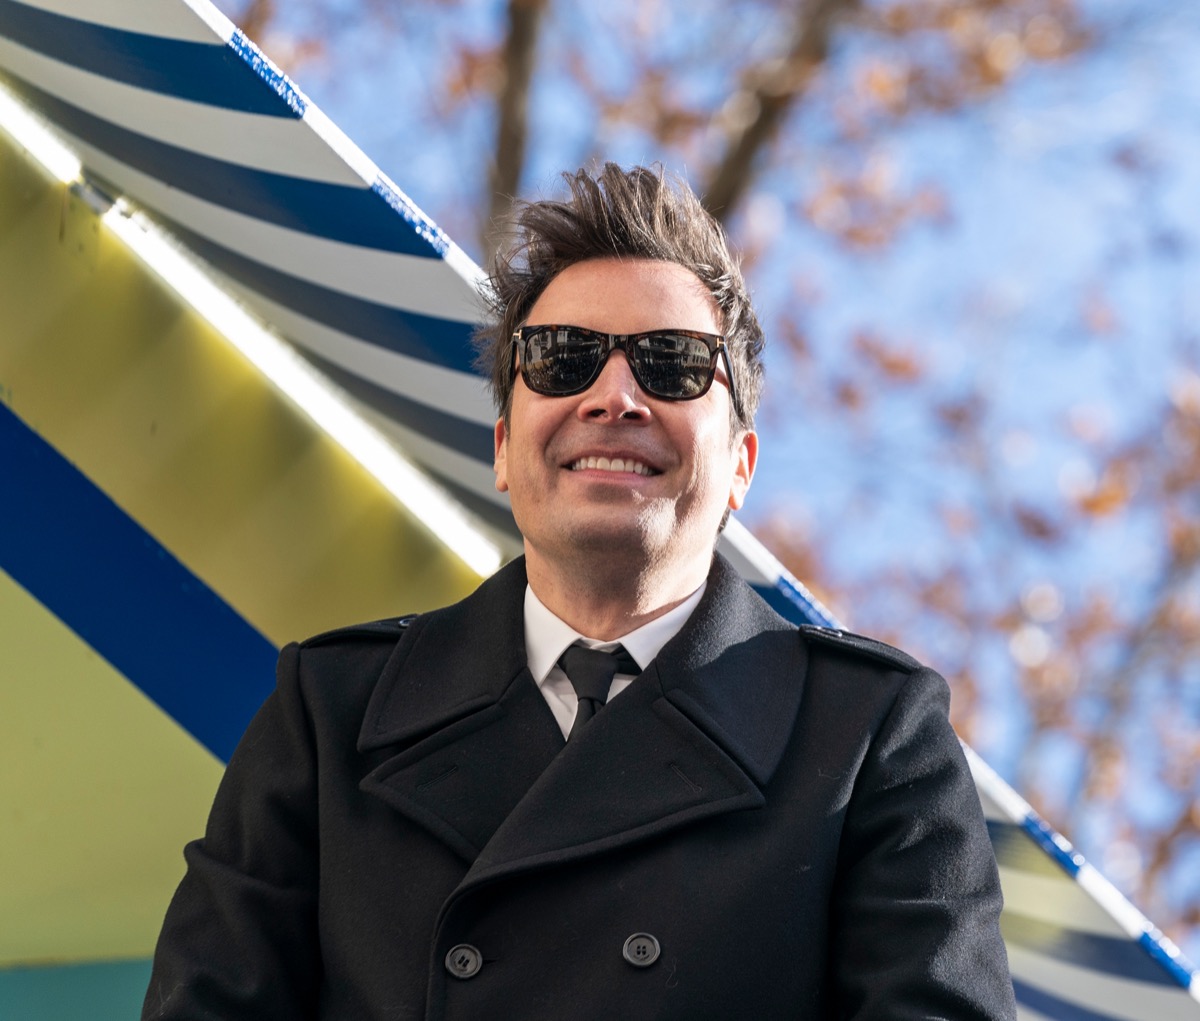 Jimmy Fallon at the Macy's Thanksgiving Day Parade in 2019